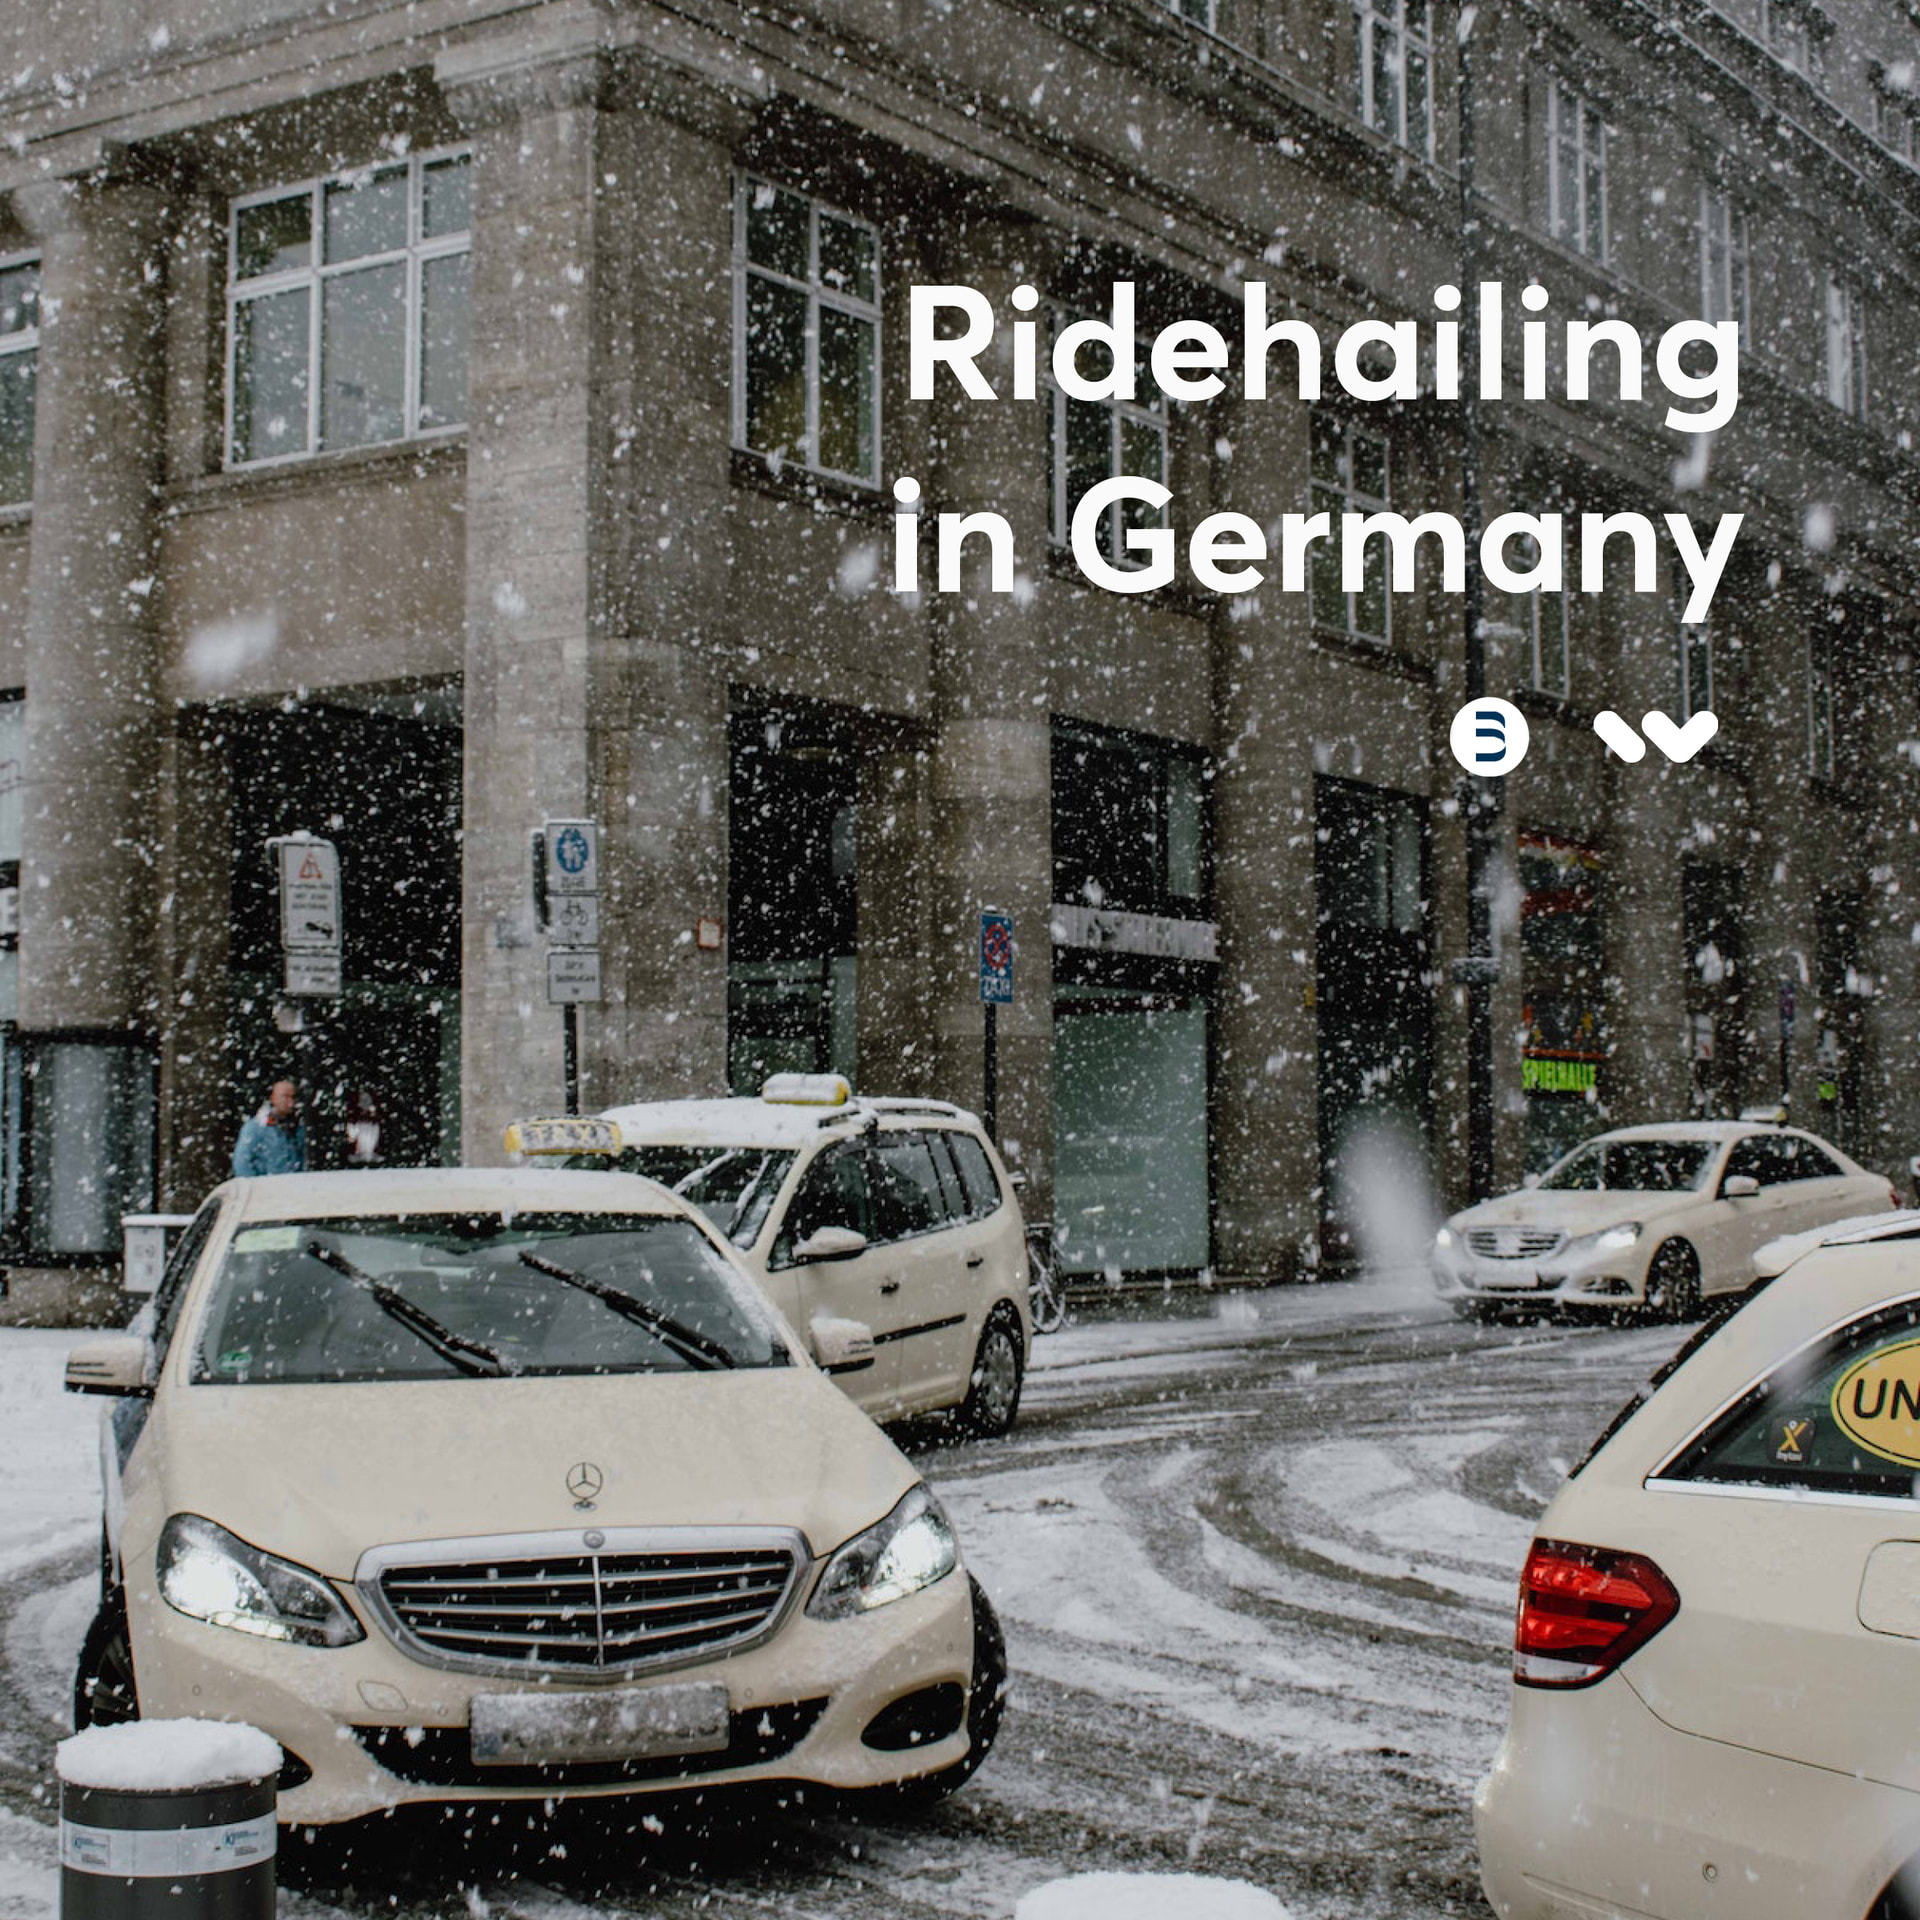 Wunder Mobility template titled "Ridehailing in Deutschland" featuring Bernstein and Wunder logotypes.